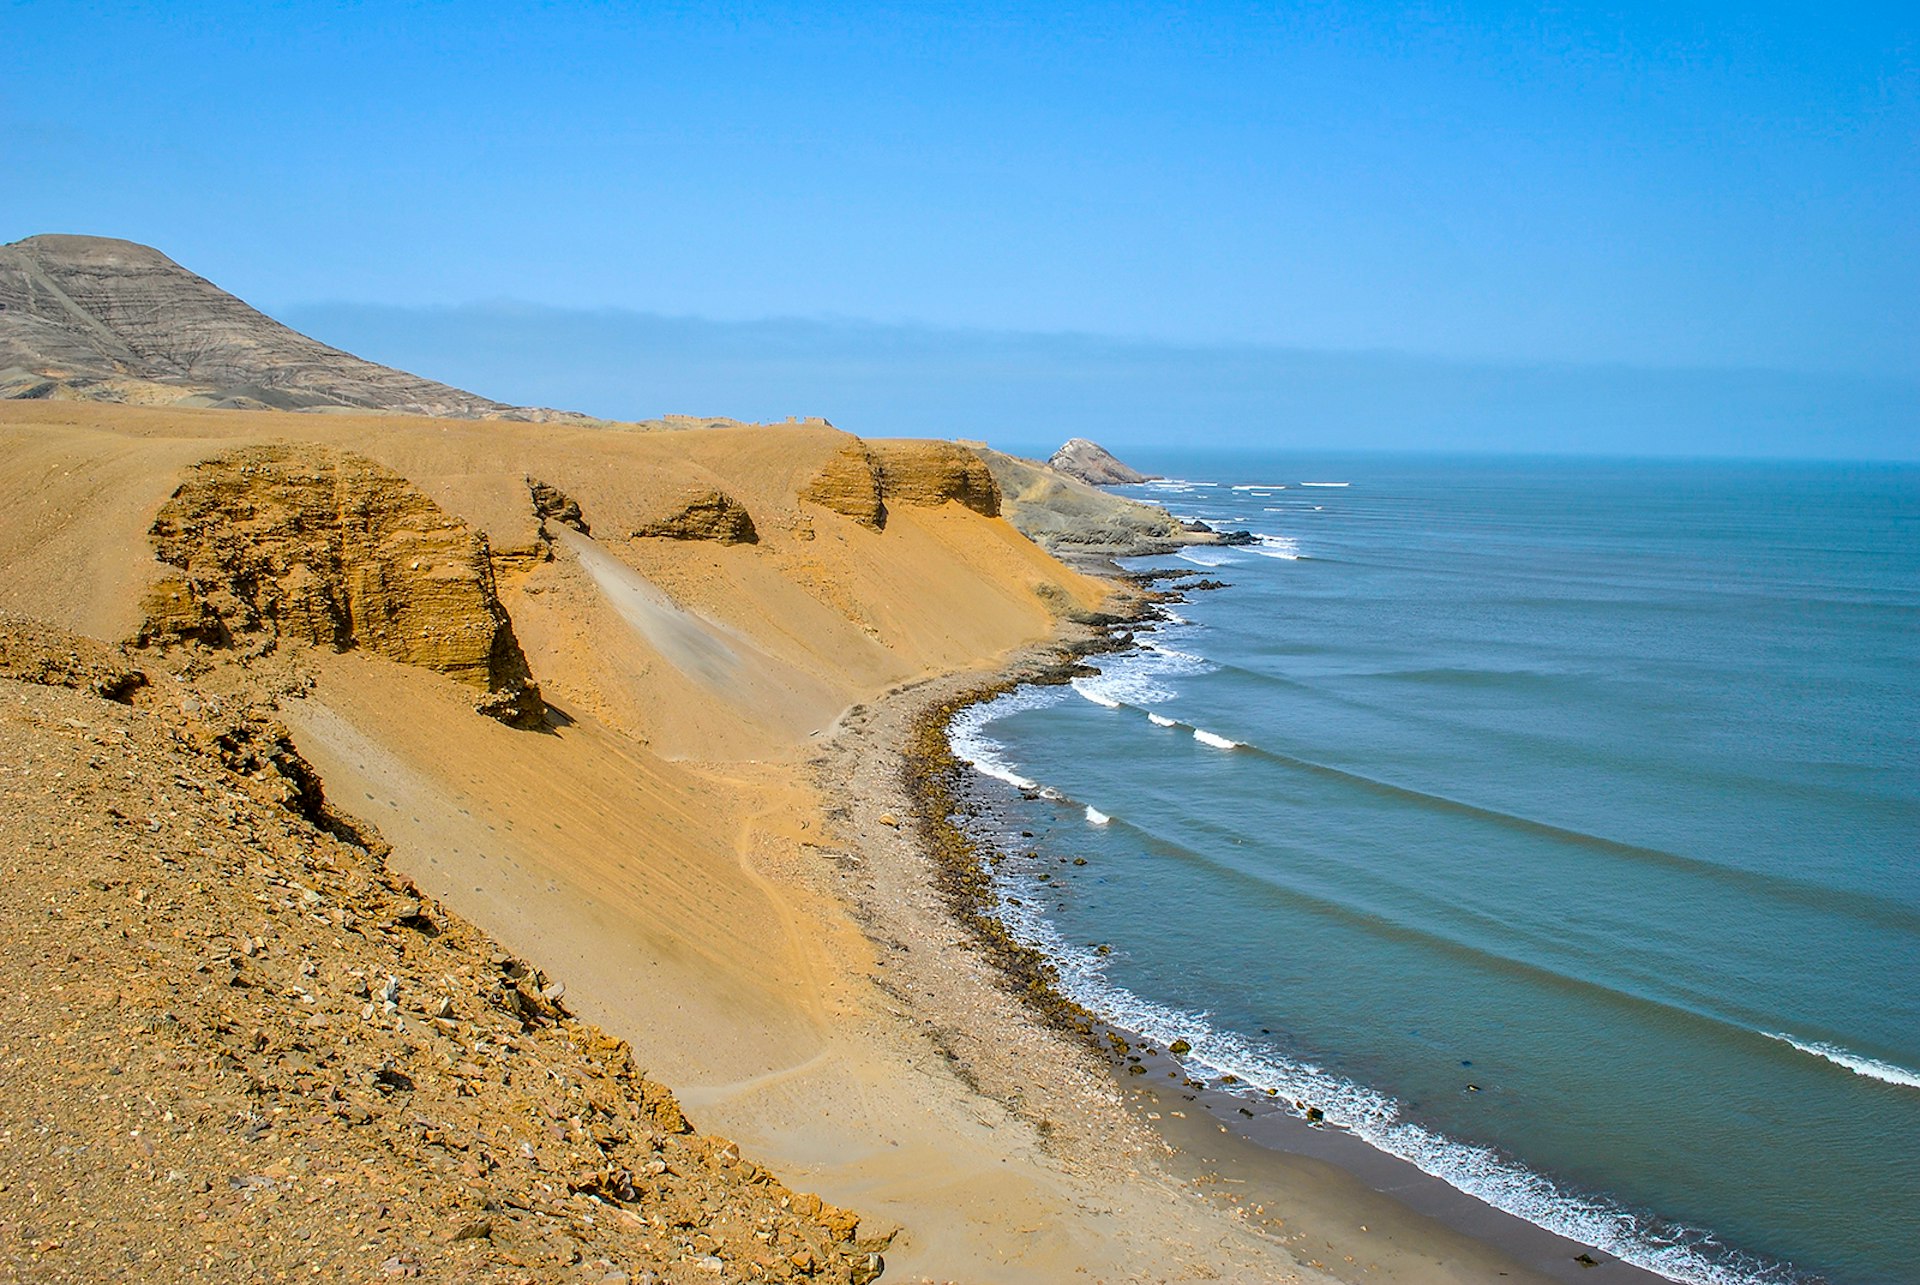 A coastline buttressed by large golden dunes and rock faces © marcosvelloso / shutterstock